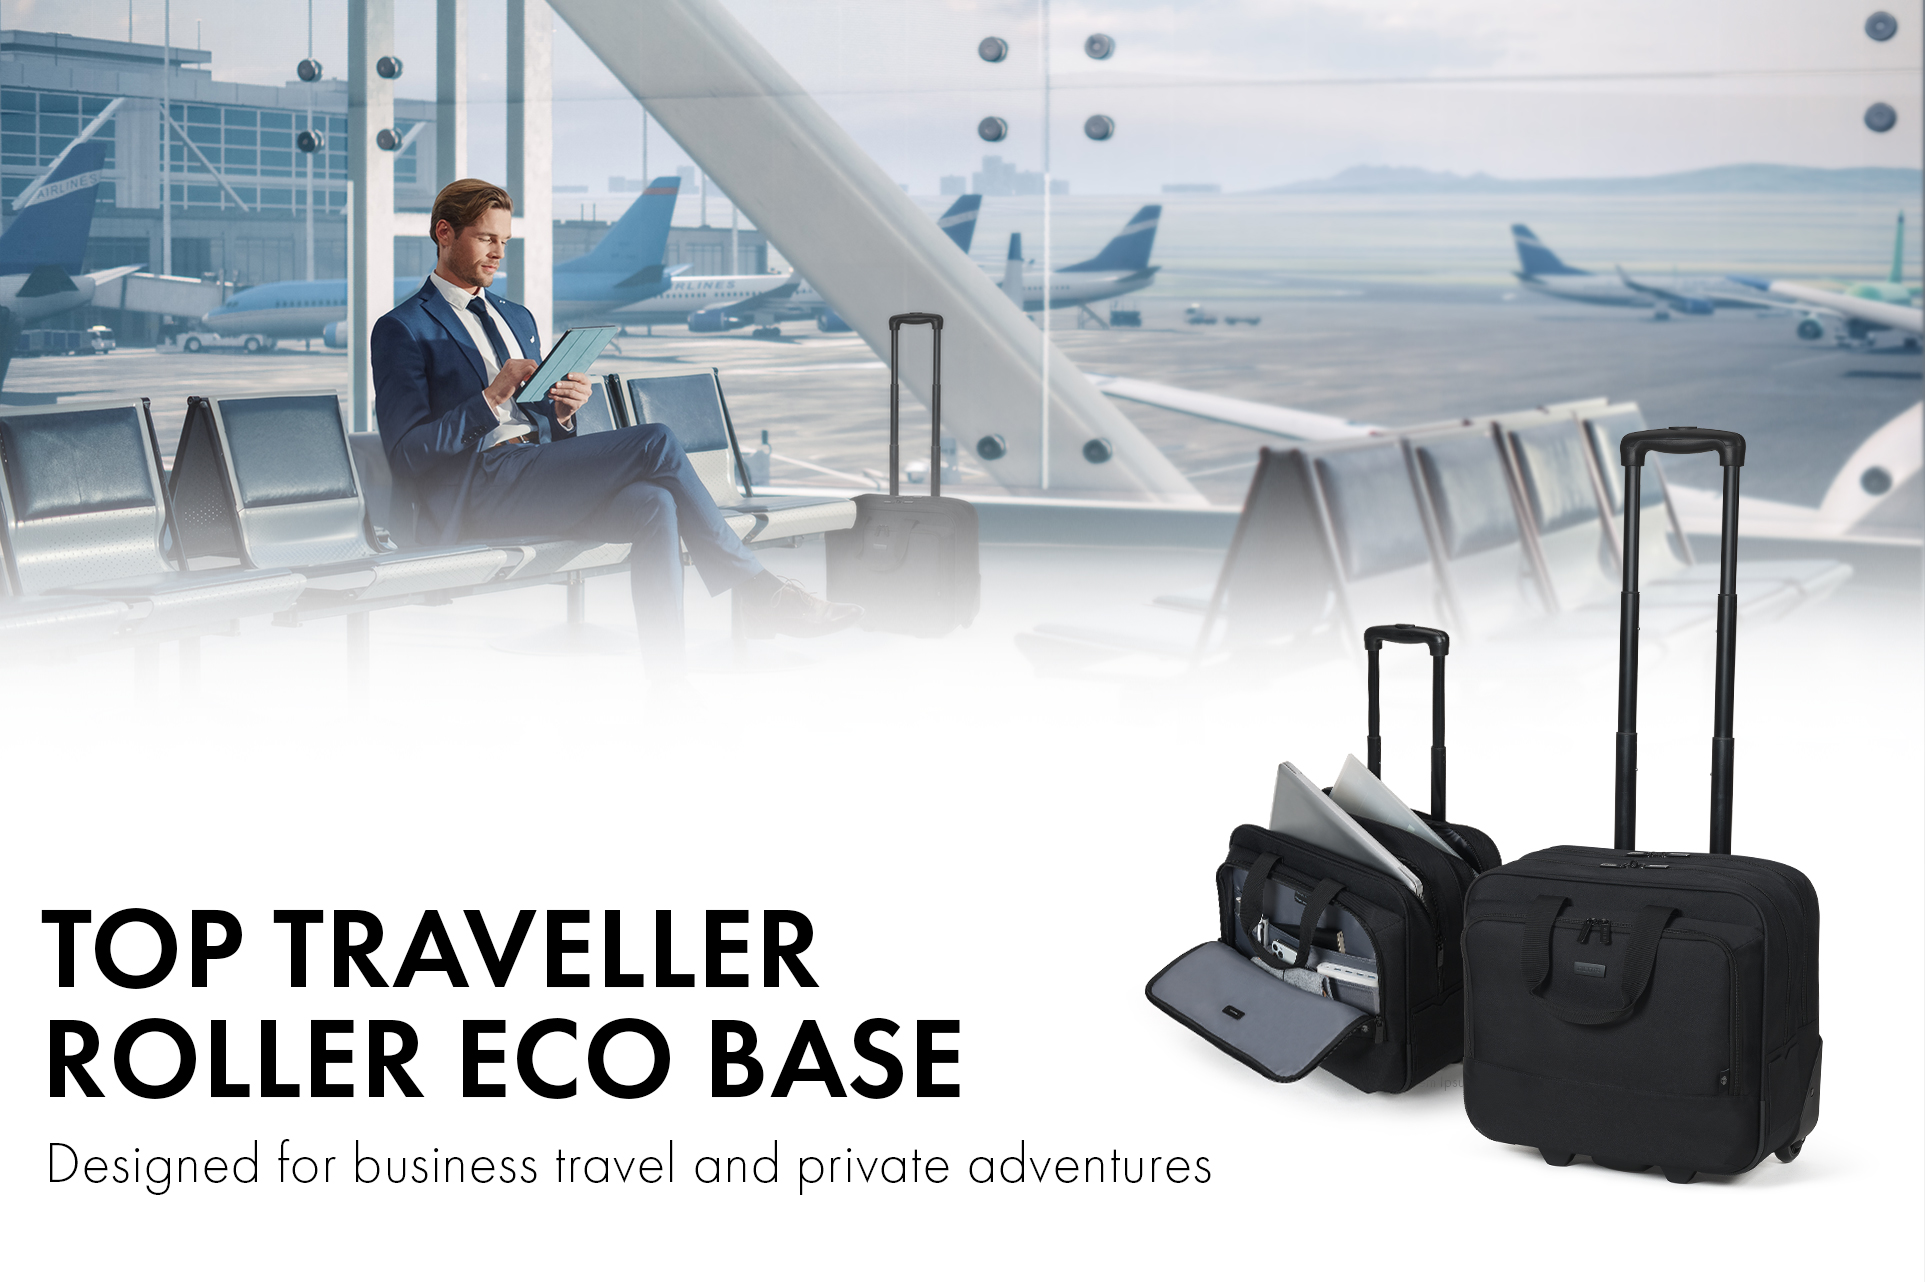 Designed for business trips and private adventures — the Eco Top Traveller BASE laptop trolley